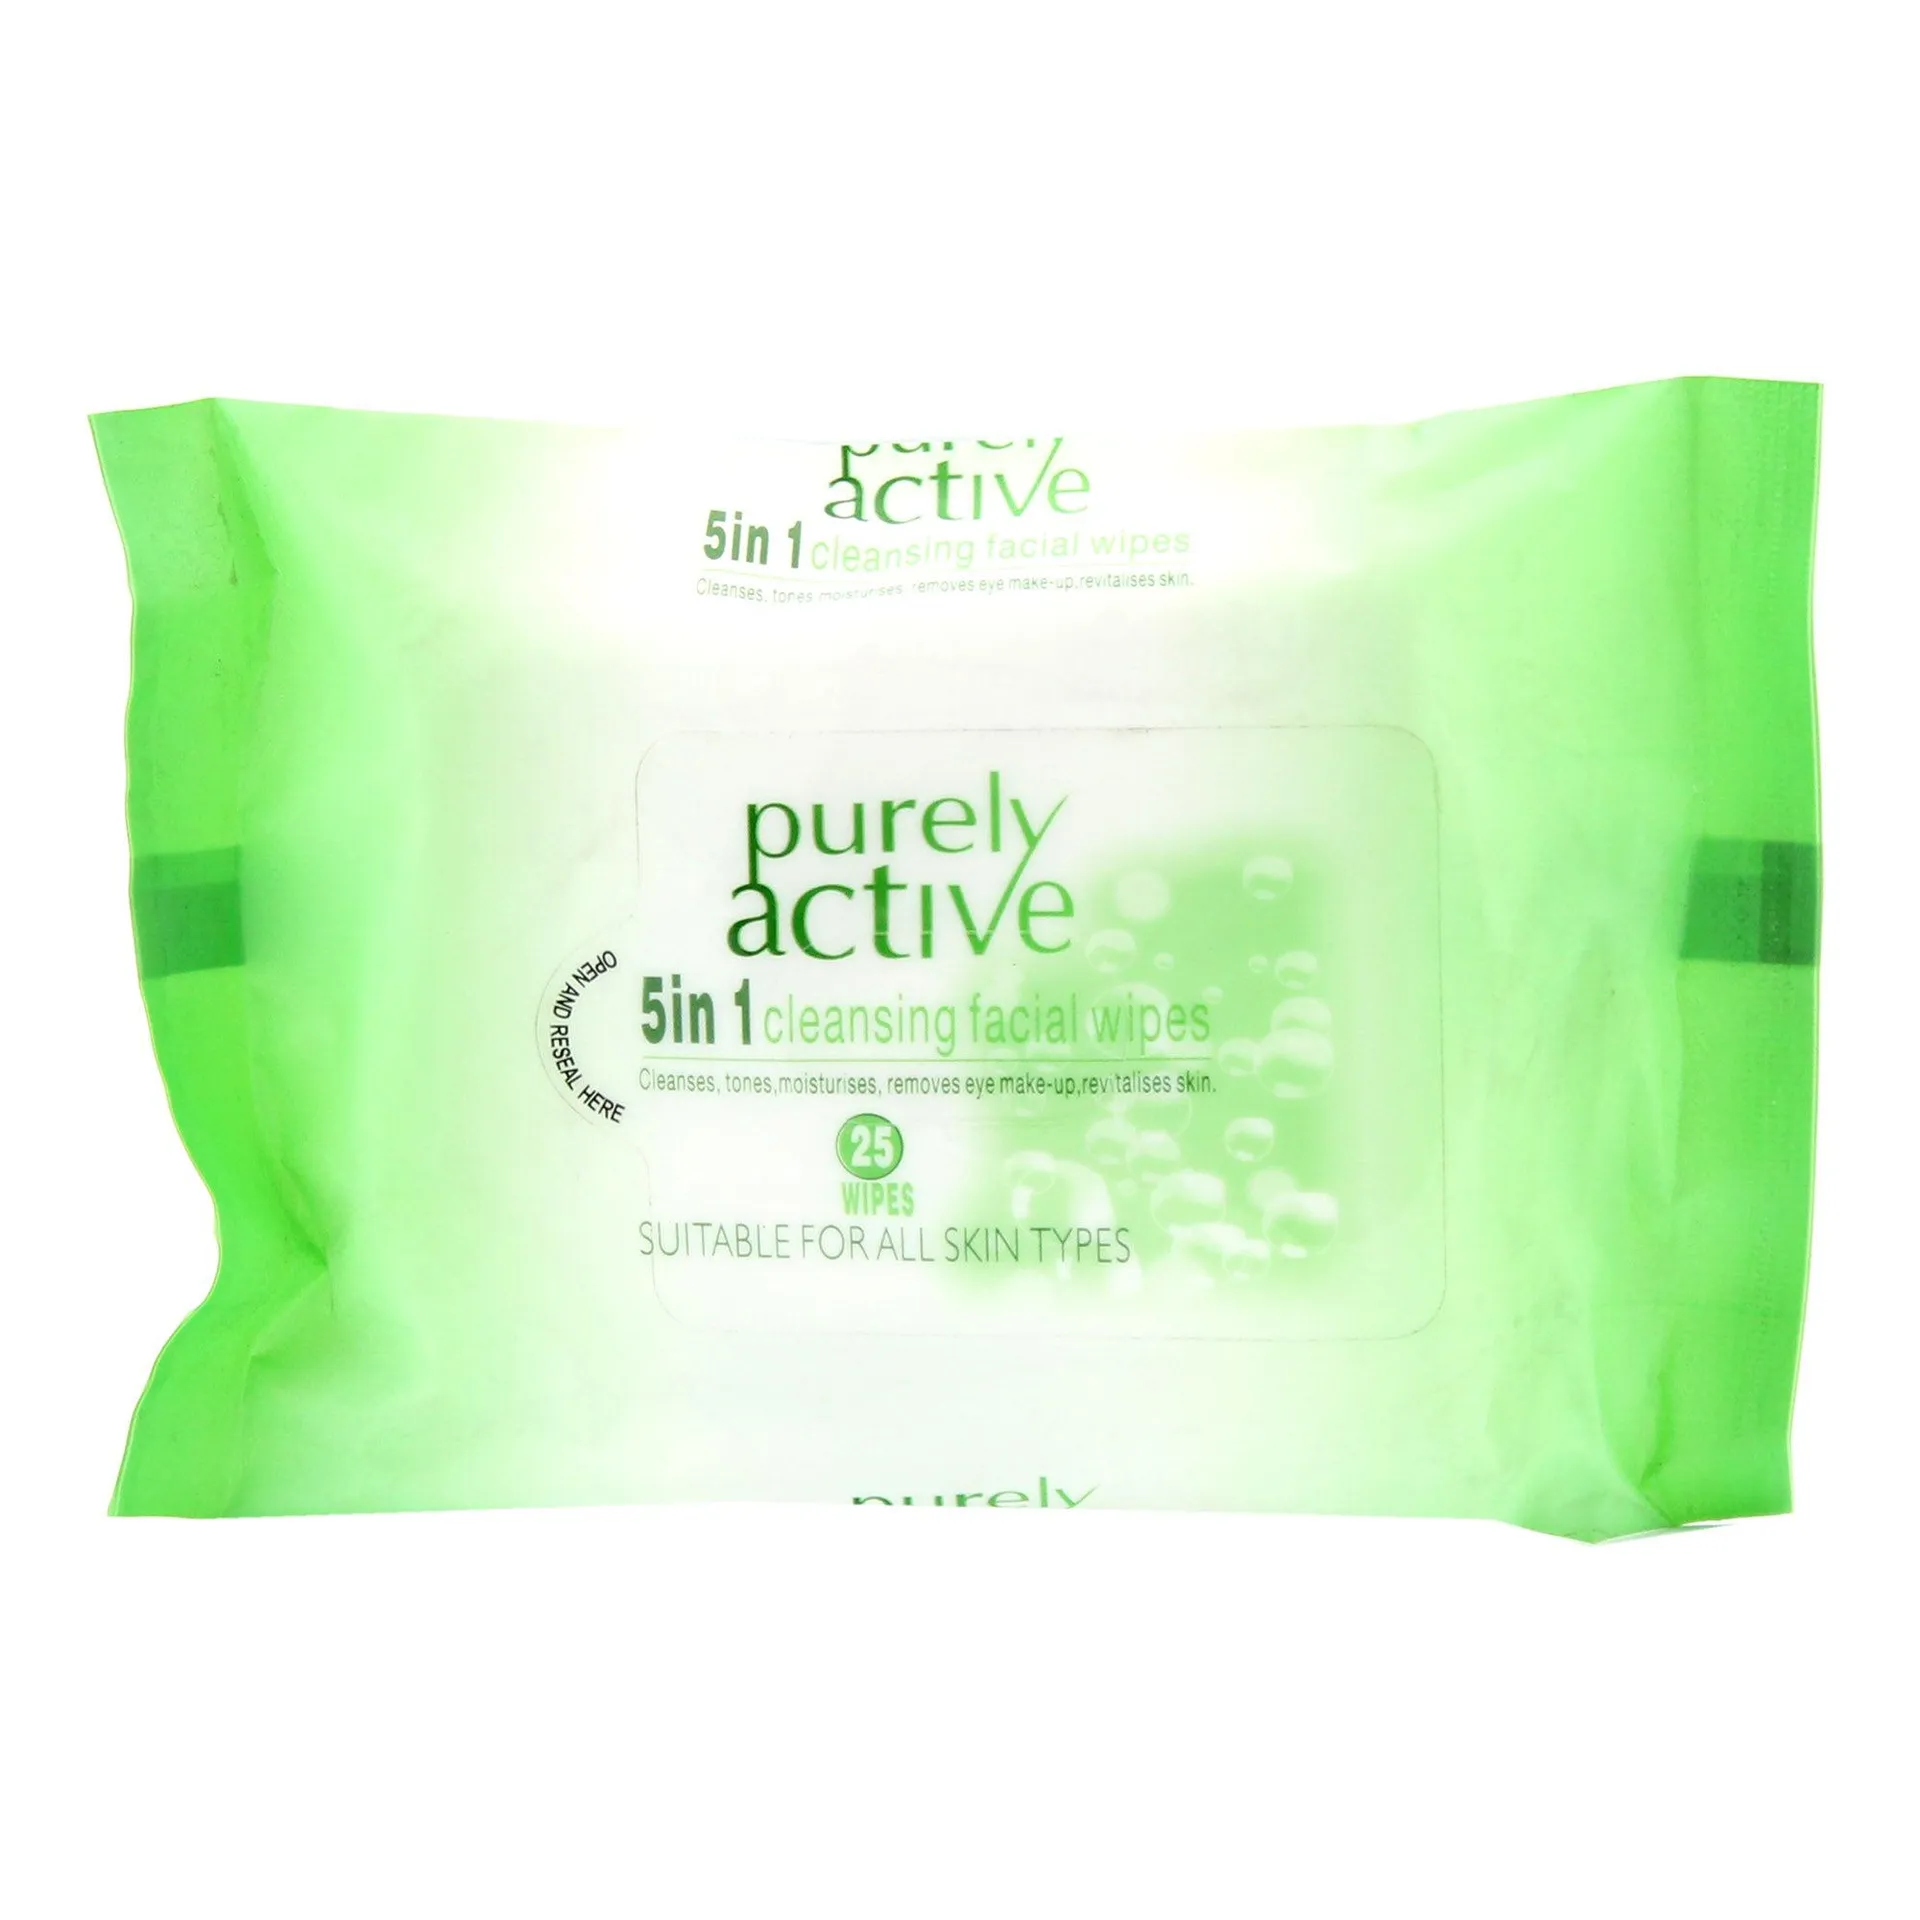 Purely Active Facial Cleansing Wipes 25pcs